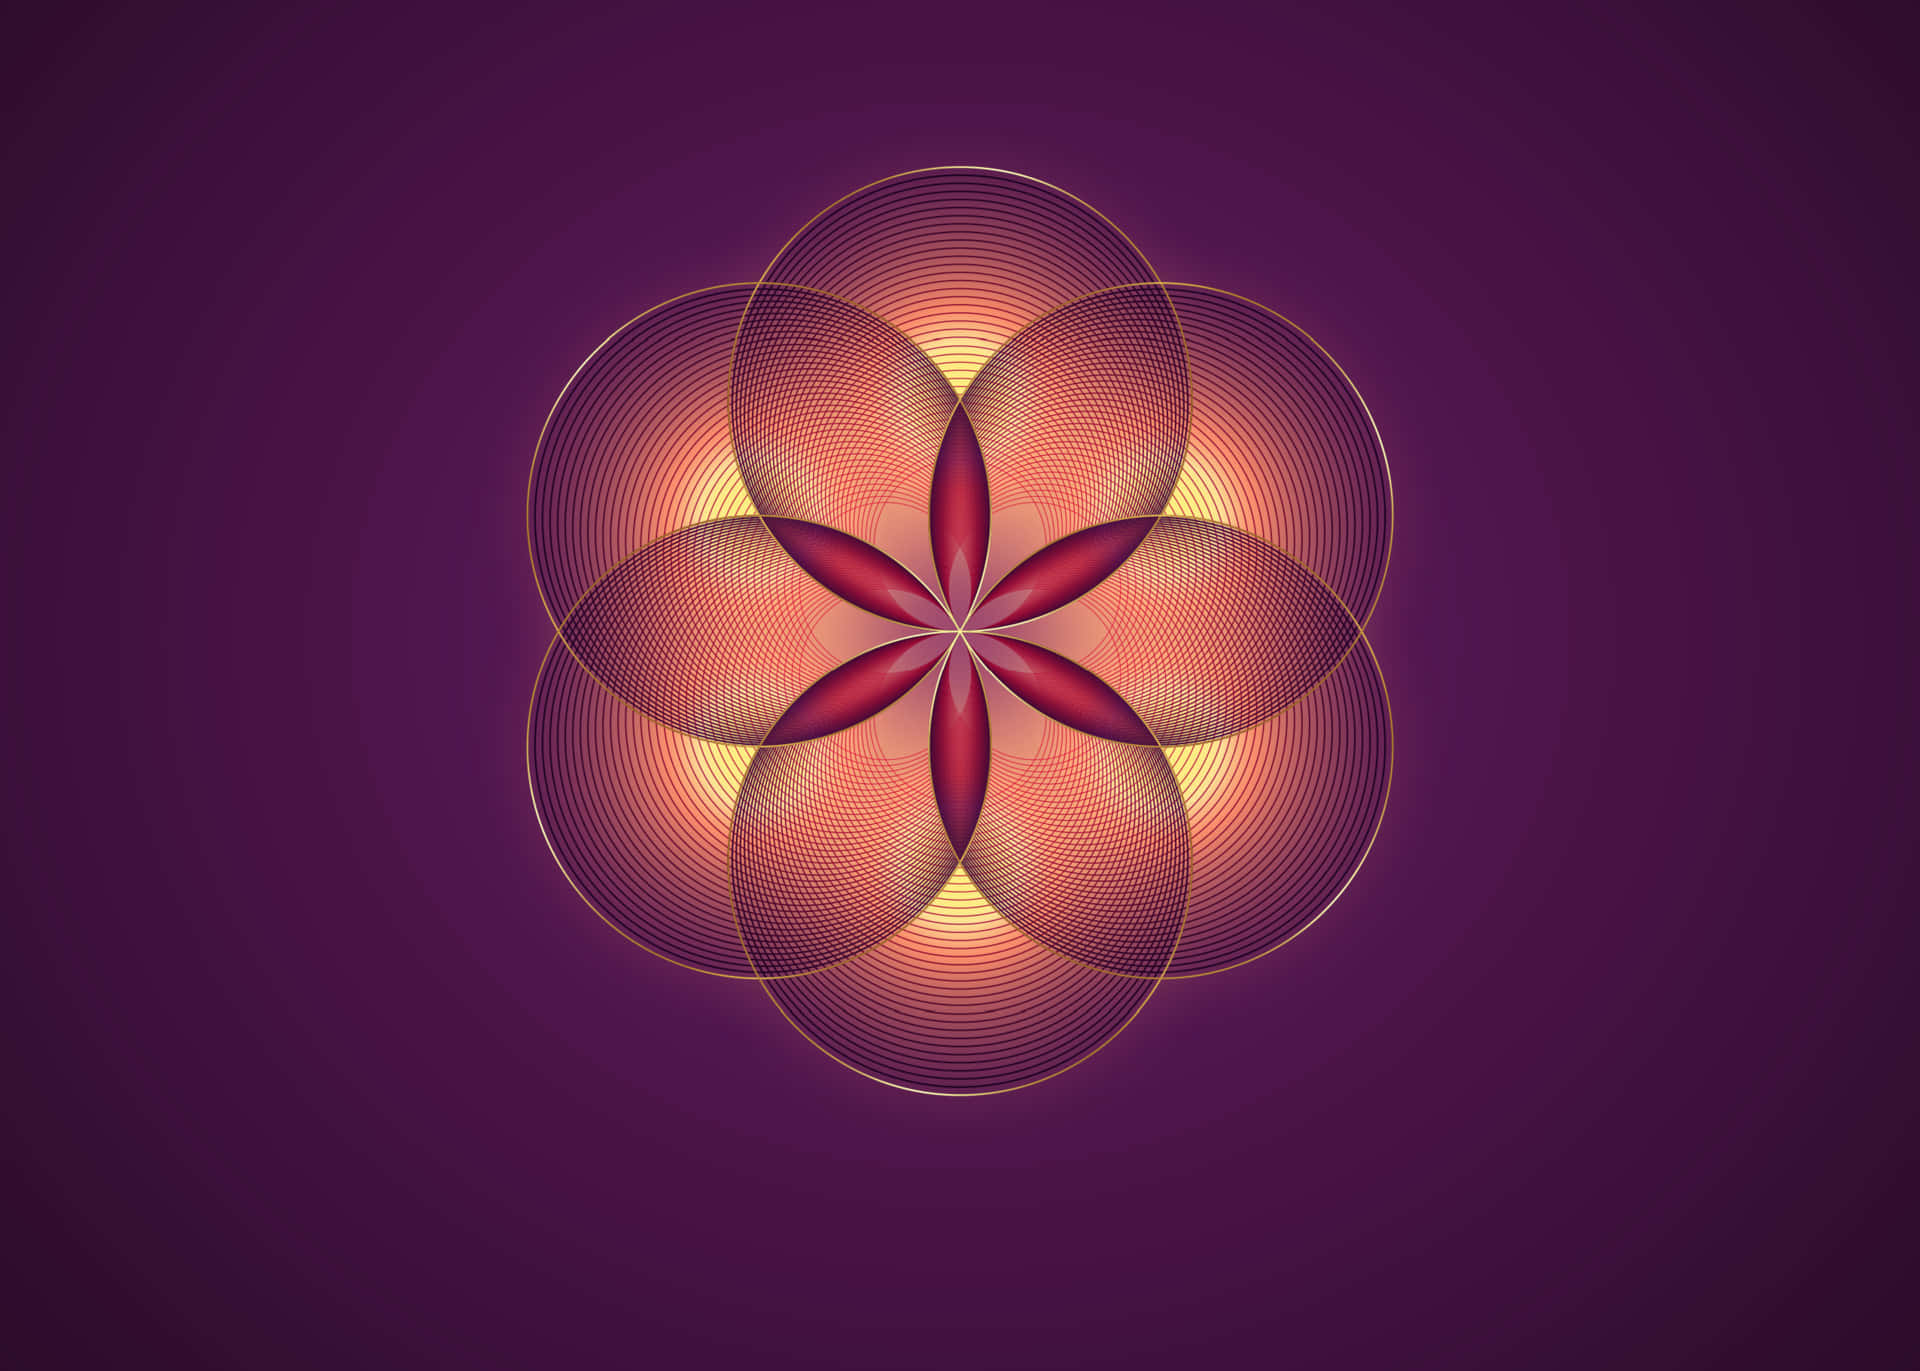 Unlock the power of the Flower of Life Wallpaper